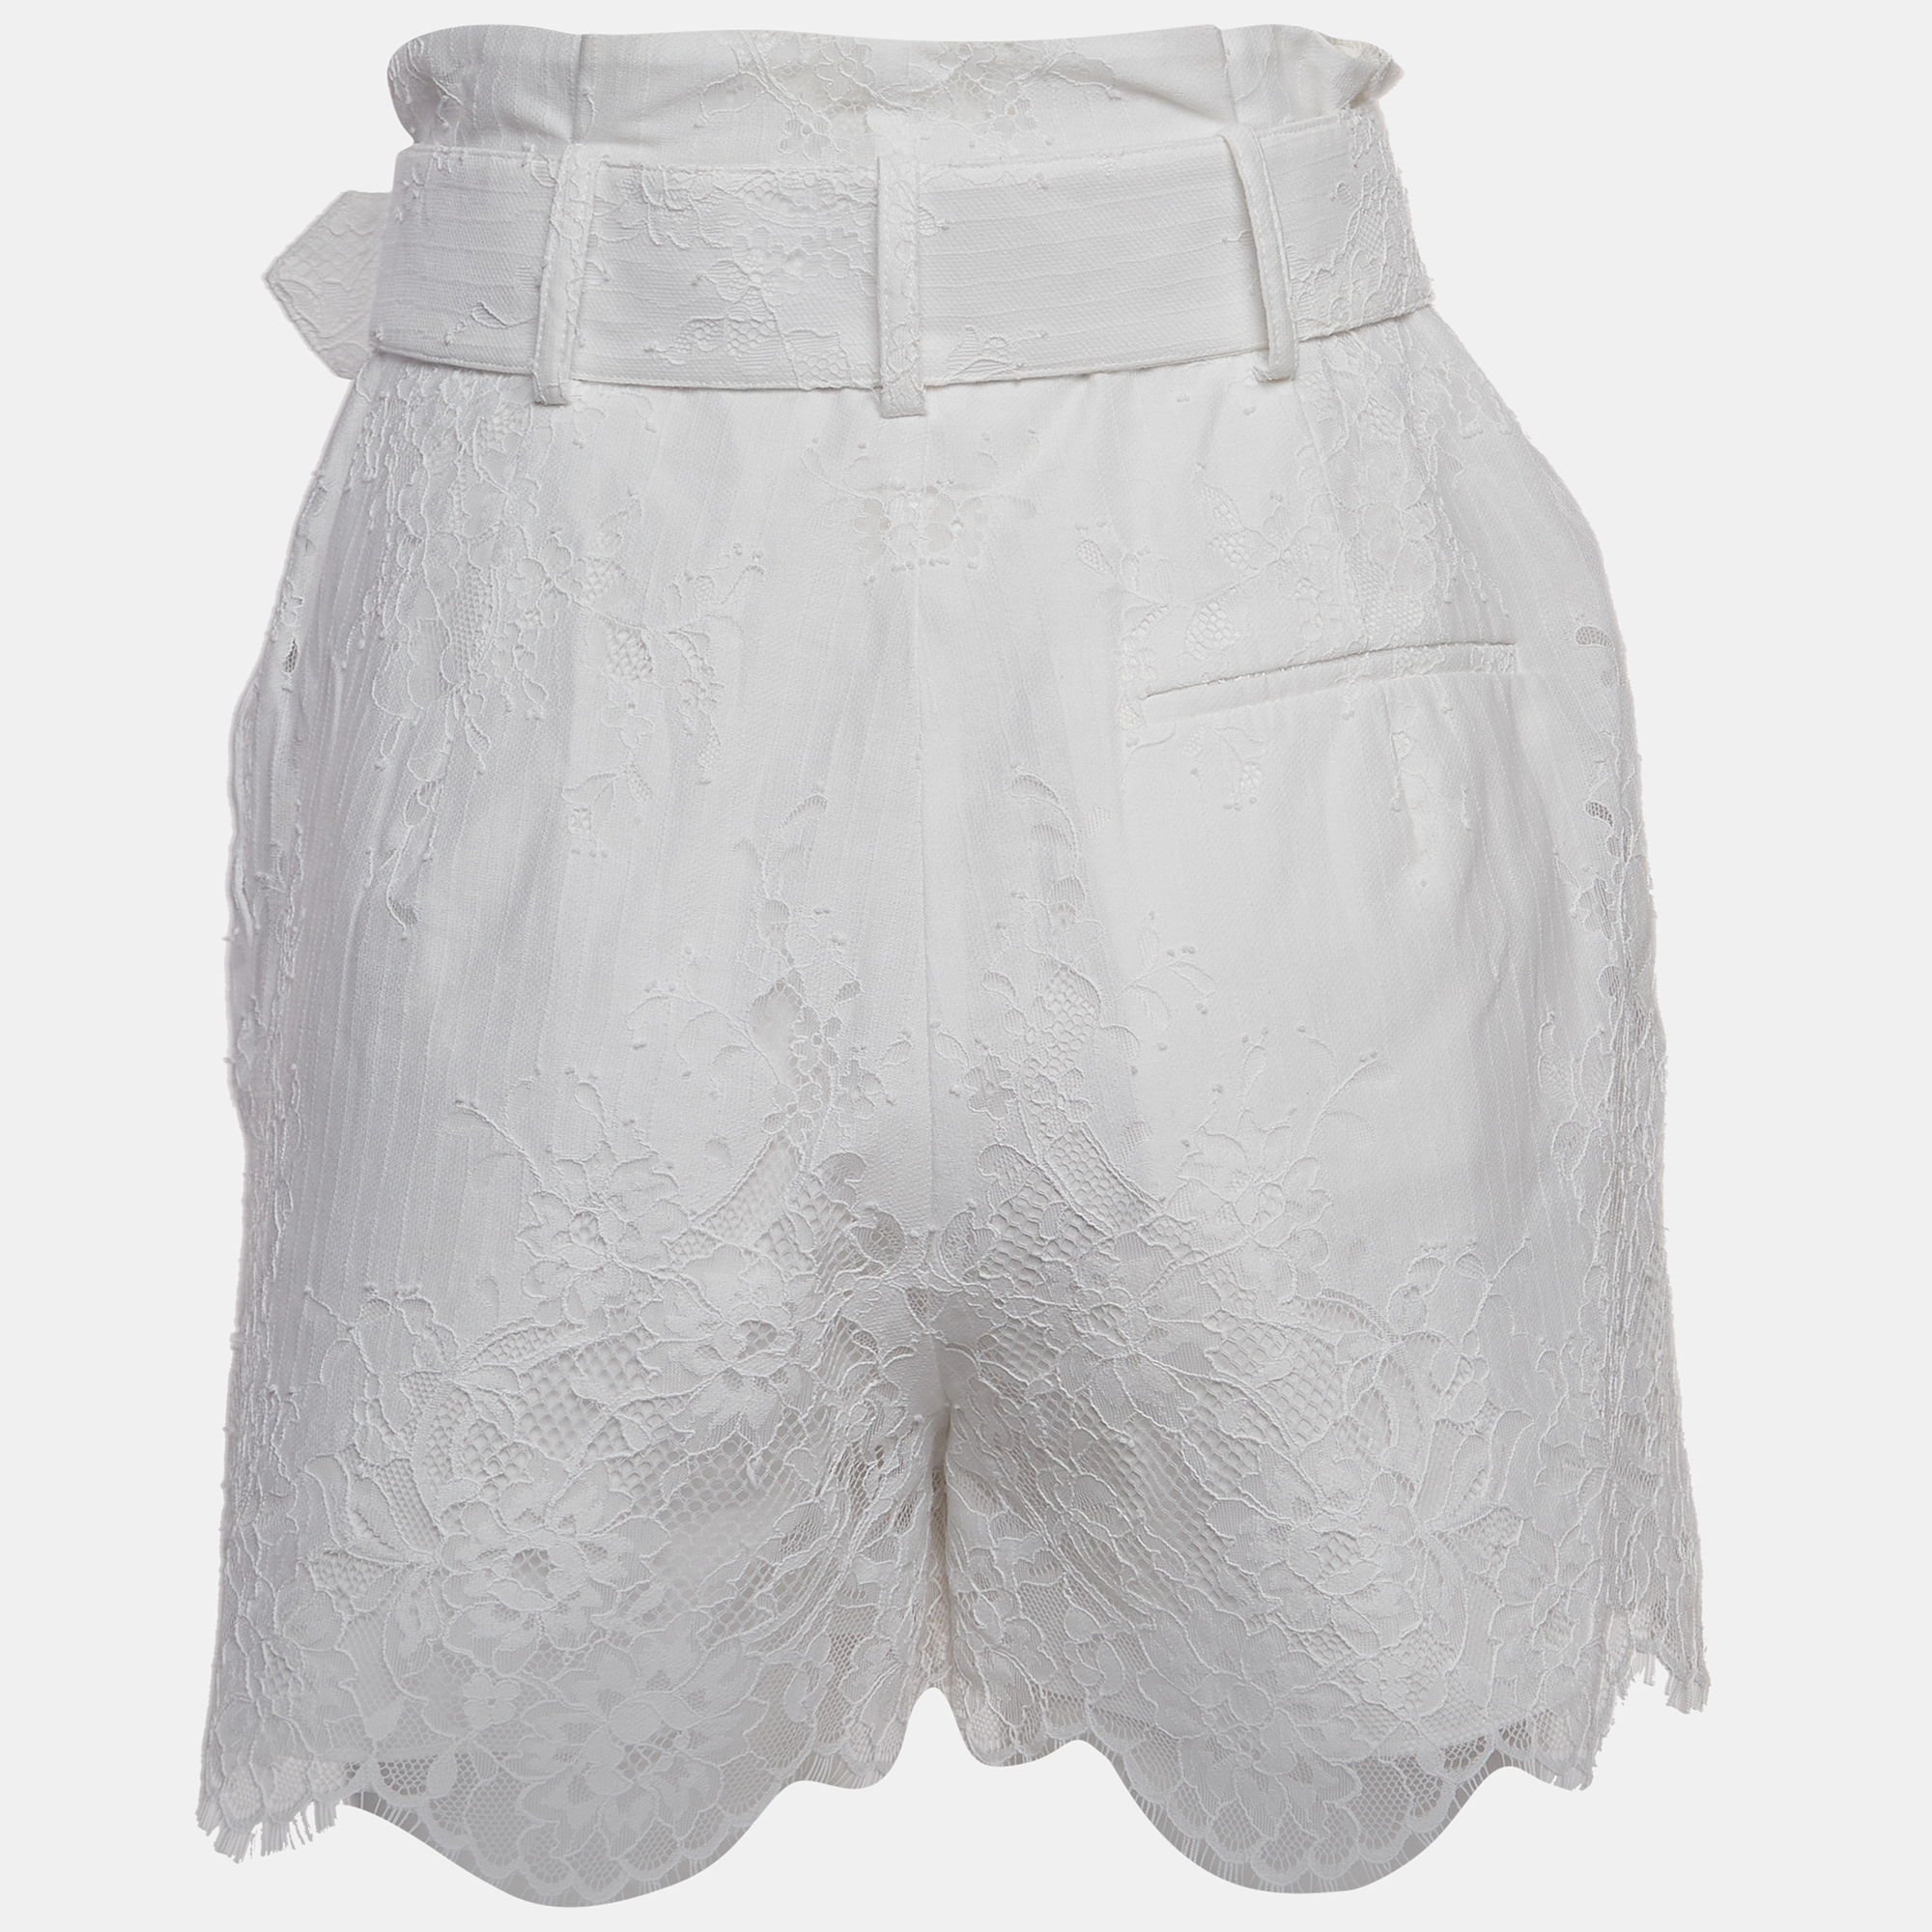  Self-Portrait White Embroidered Cotton Belted Shorts S